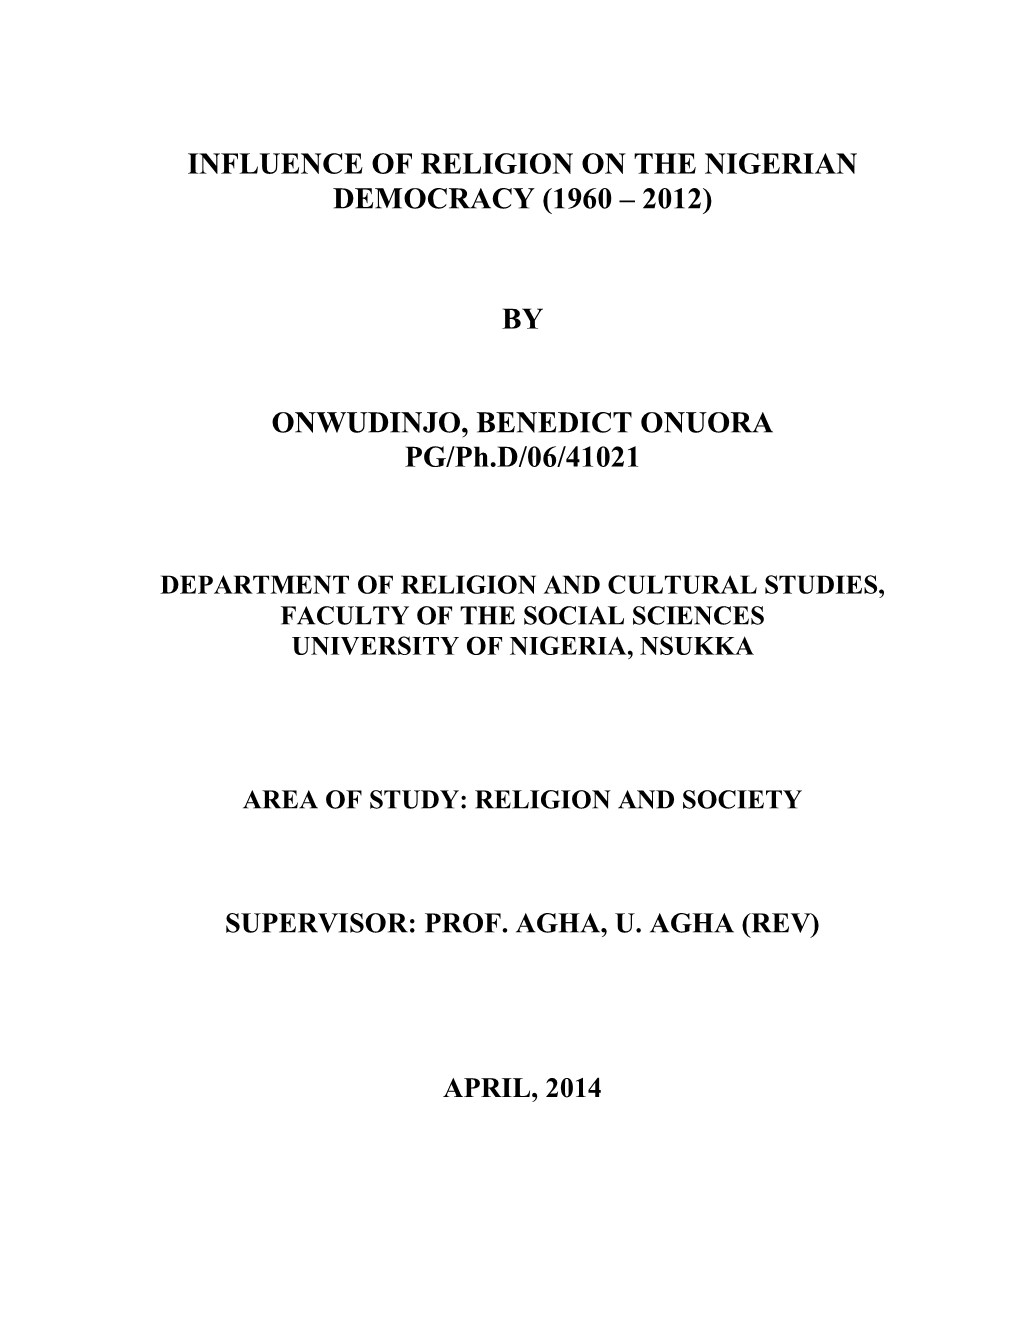 Influence of Religion on the Nigerian Democracy (1960 – 2012)